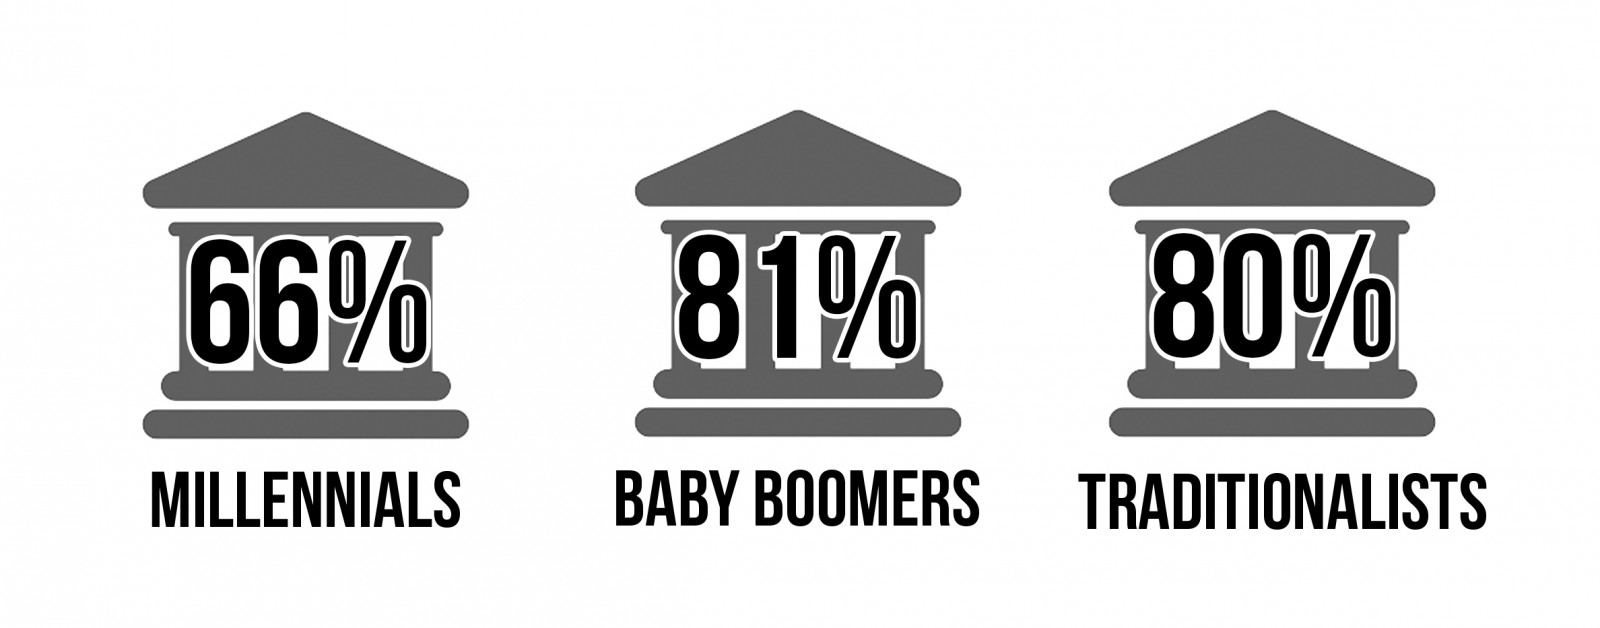 millennials, baby boomers, traditionalists